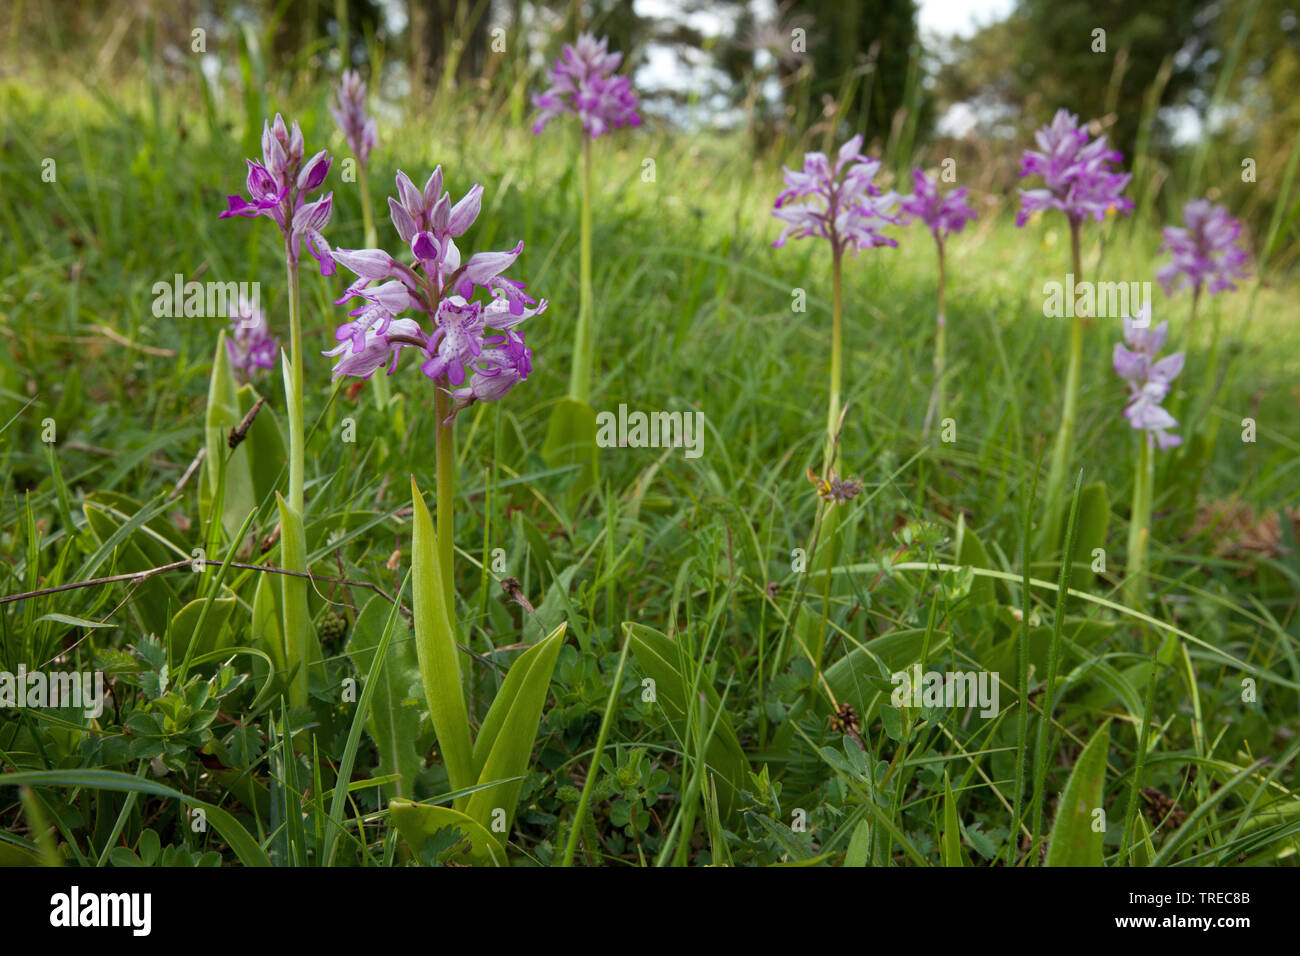 military orchid (Orchis militaris), several blooming orchids in a meadow, Germany, Eifel Stock Photo